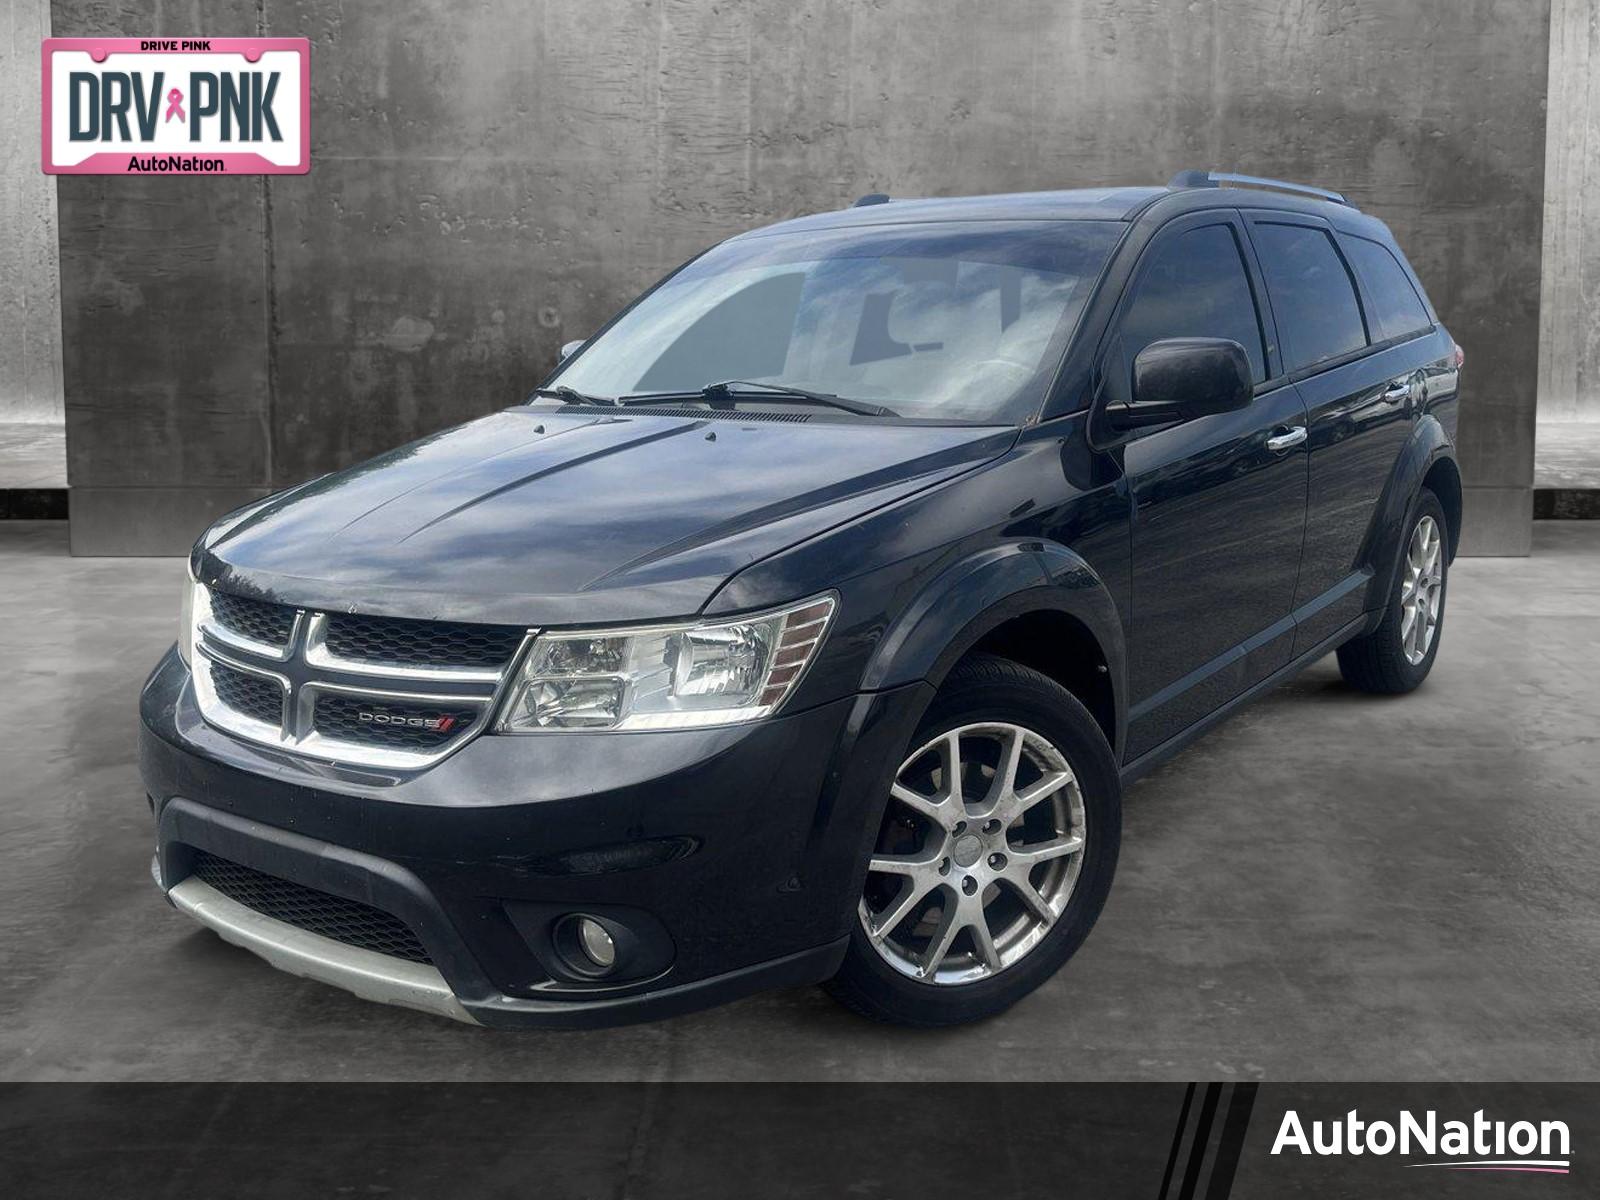 2013 Dodge Journey Vehicle Photo in Clearwater, FL 33764